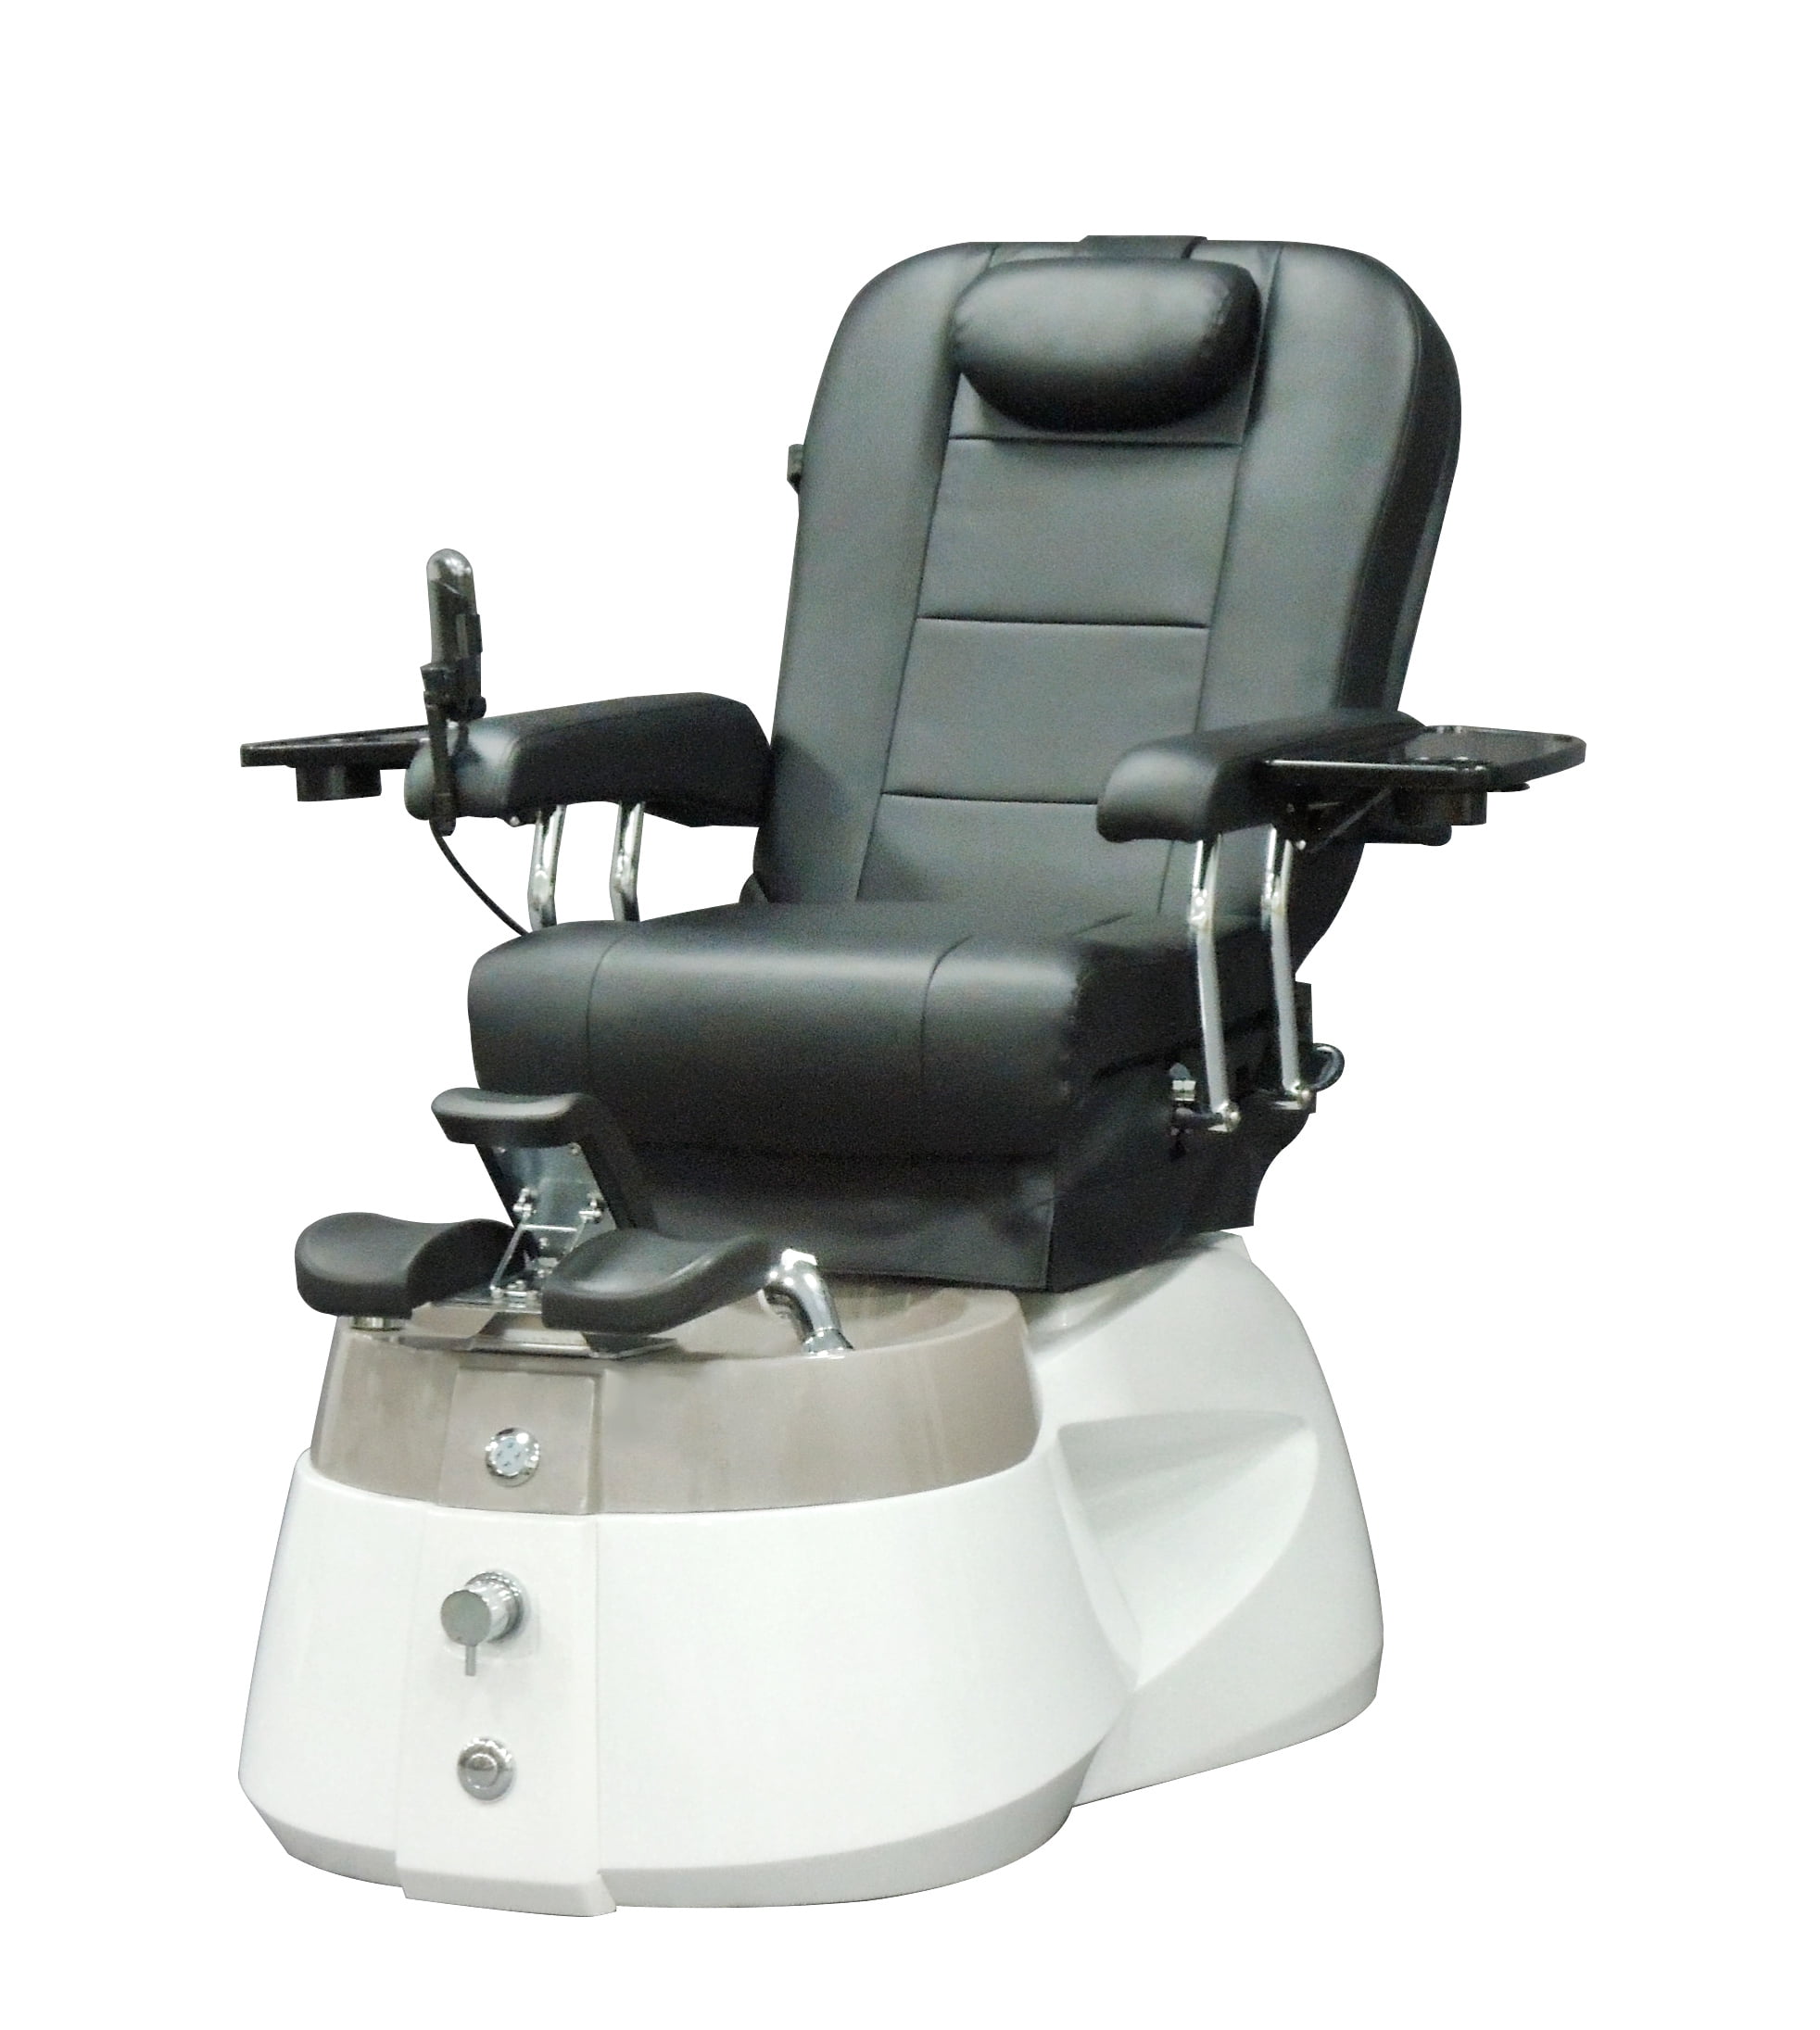 Lenior Pedicure Spa With Recline Beauty Chair Bowl Cover Pipe Less Magnetic Jet System White Silver Base And Black Cover Set Walmart Com Walmart Com